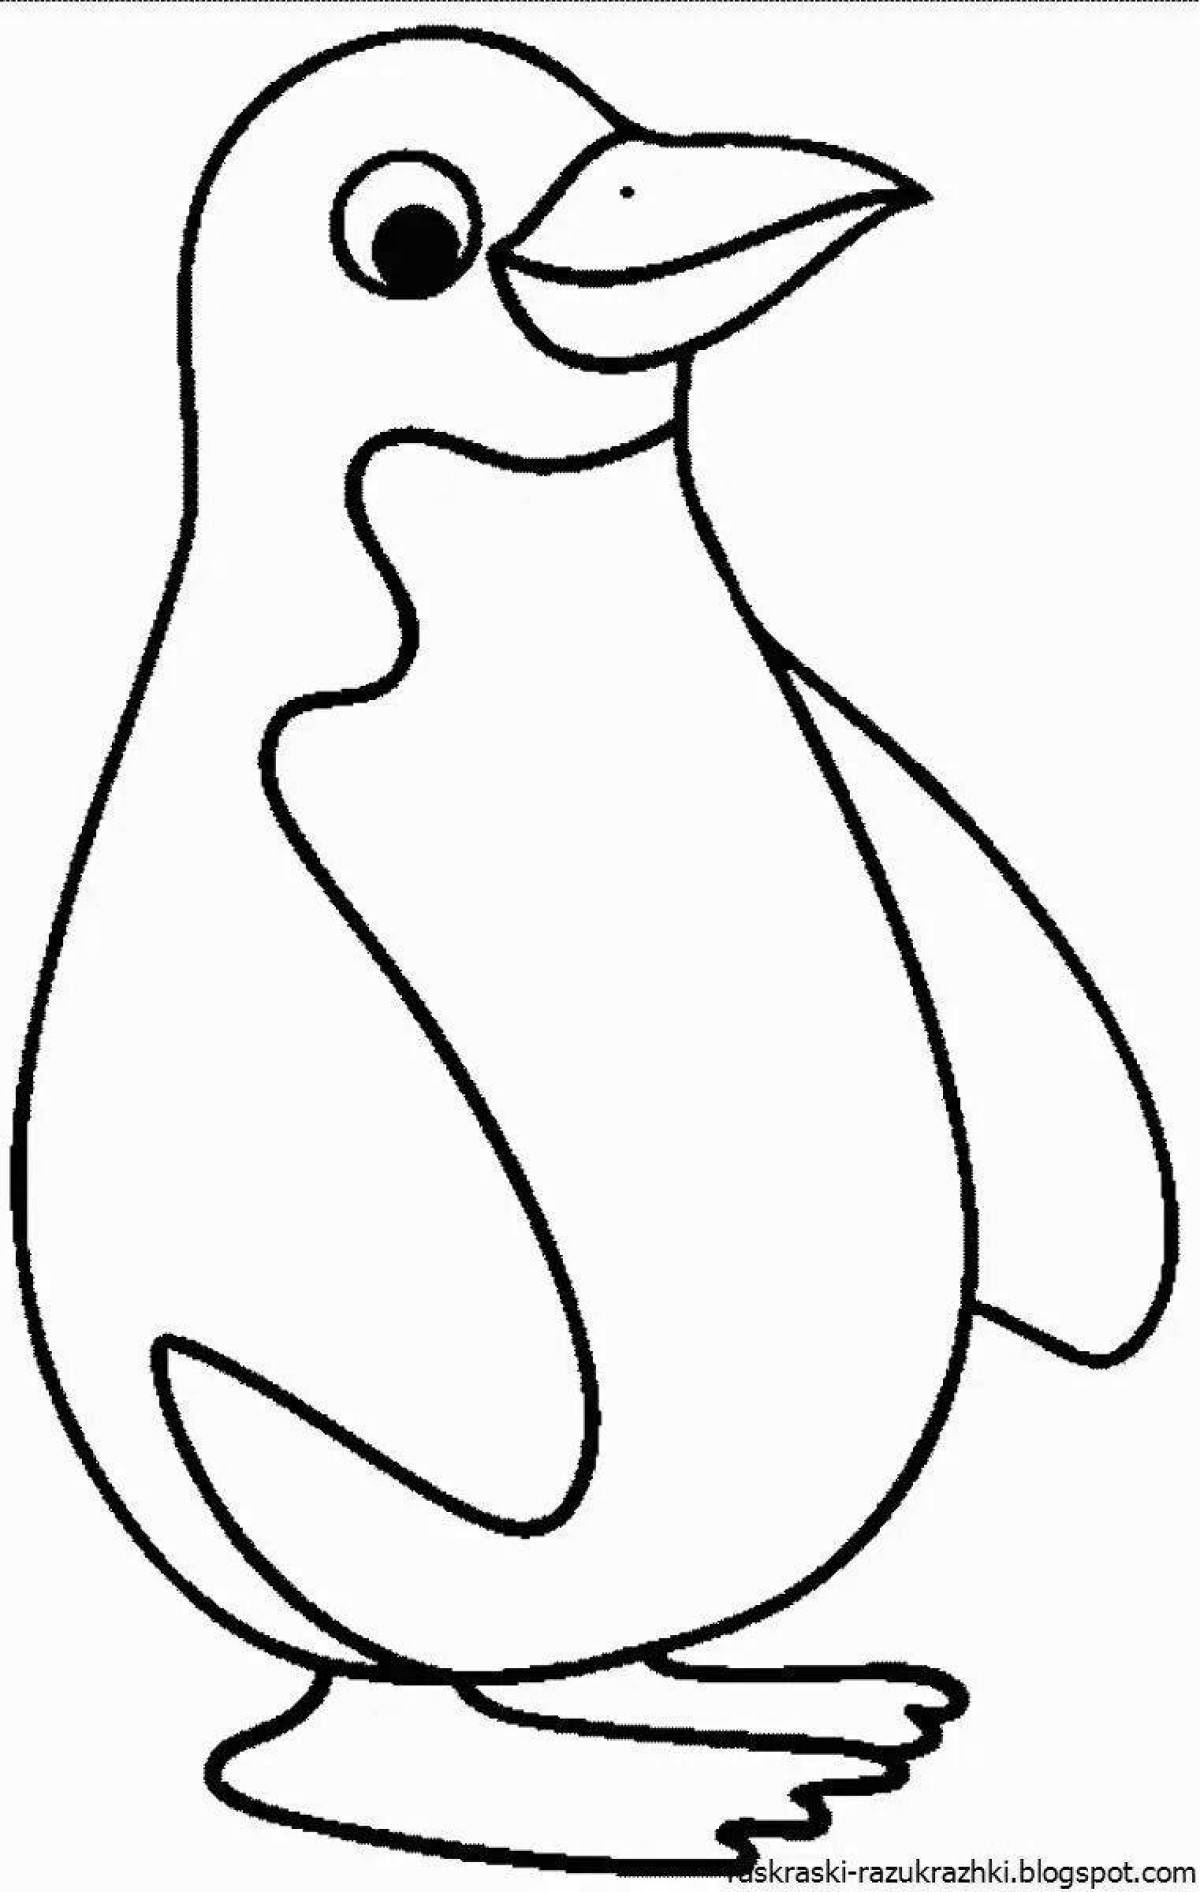 Penguin coloring page